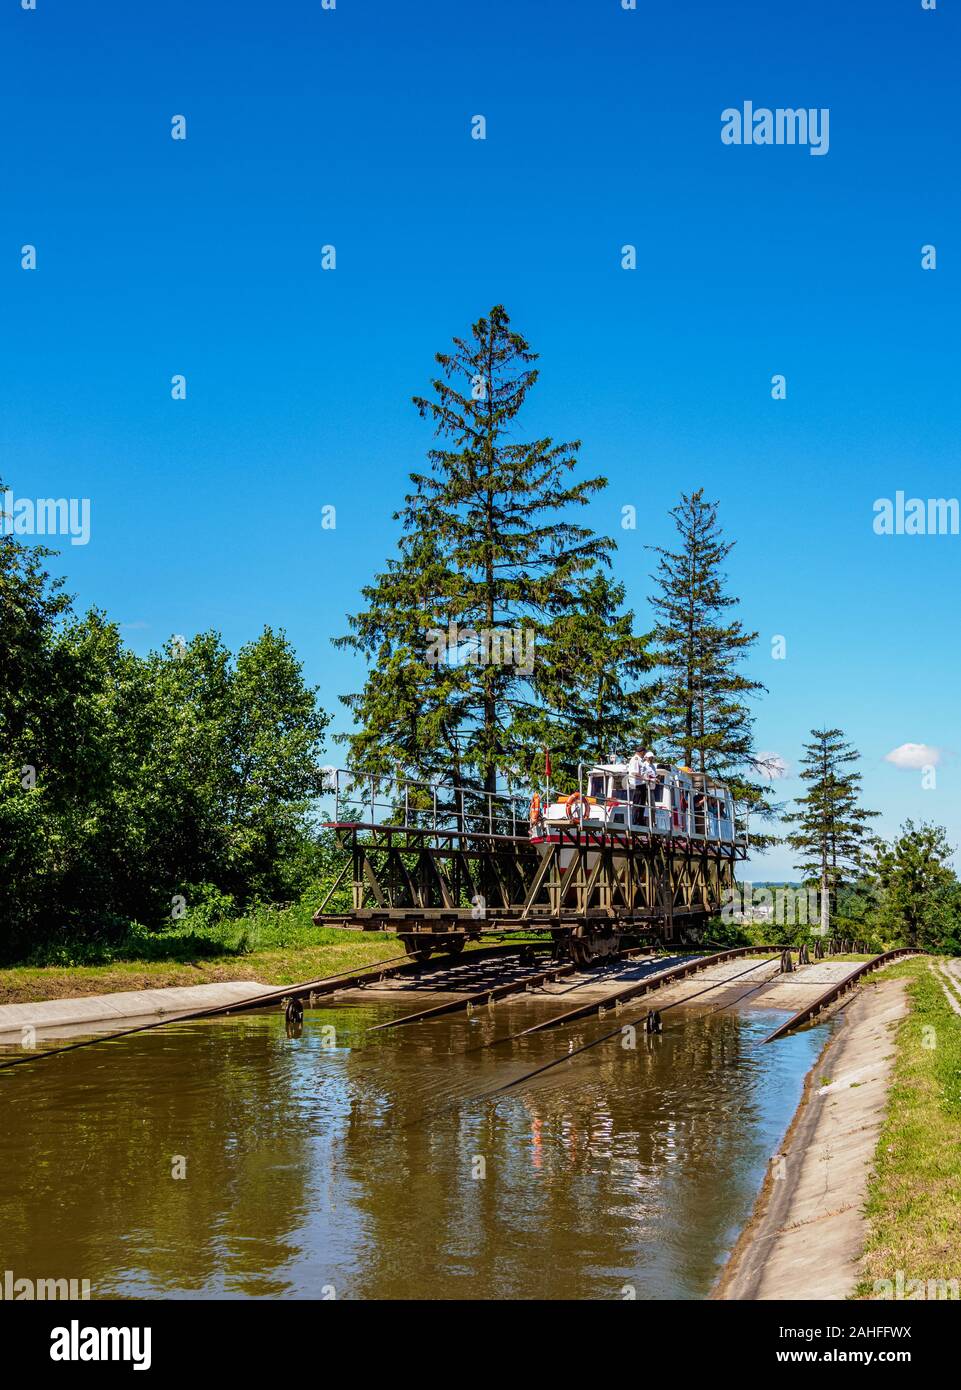 Tourist Boat in Cradle at Inclined Plane in Jelenie, Elblag Canal, Warmian-Masurian Voivodeship, Poland Stock Photo